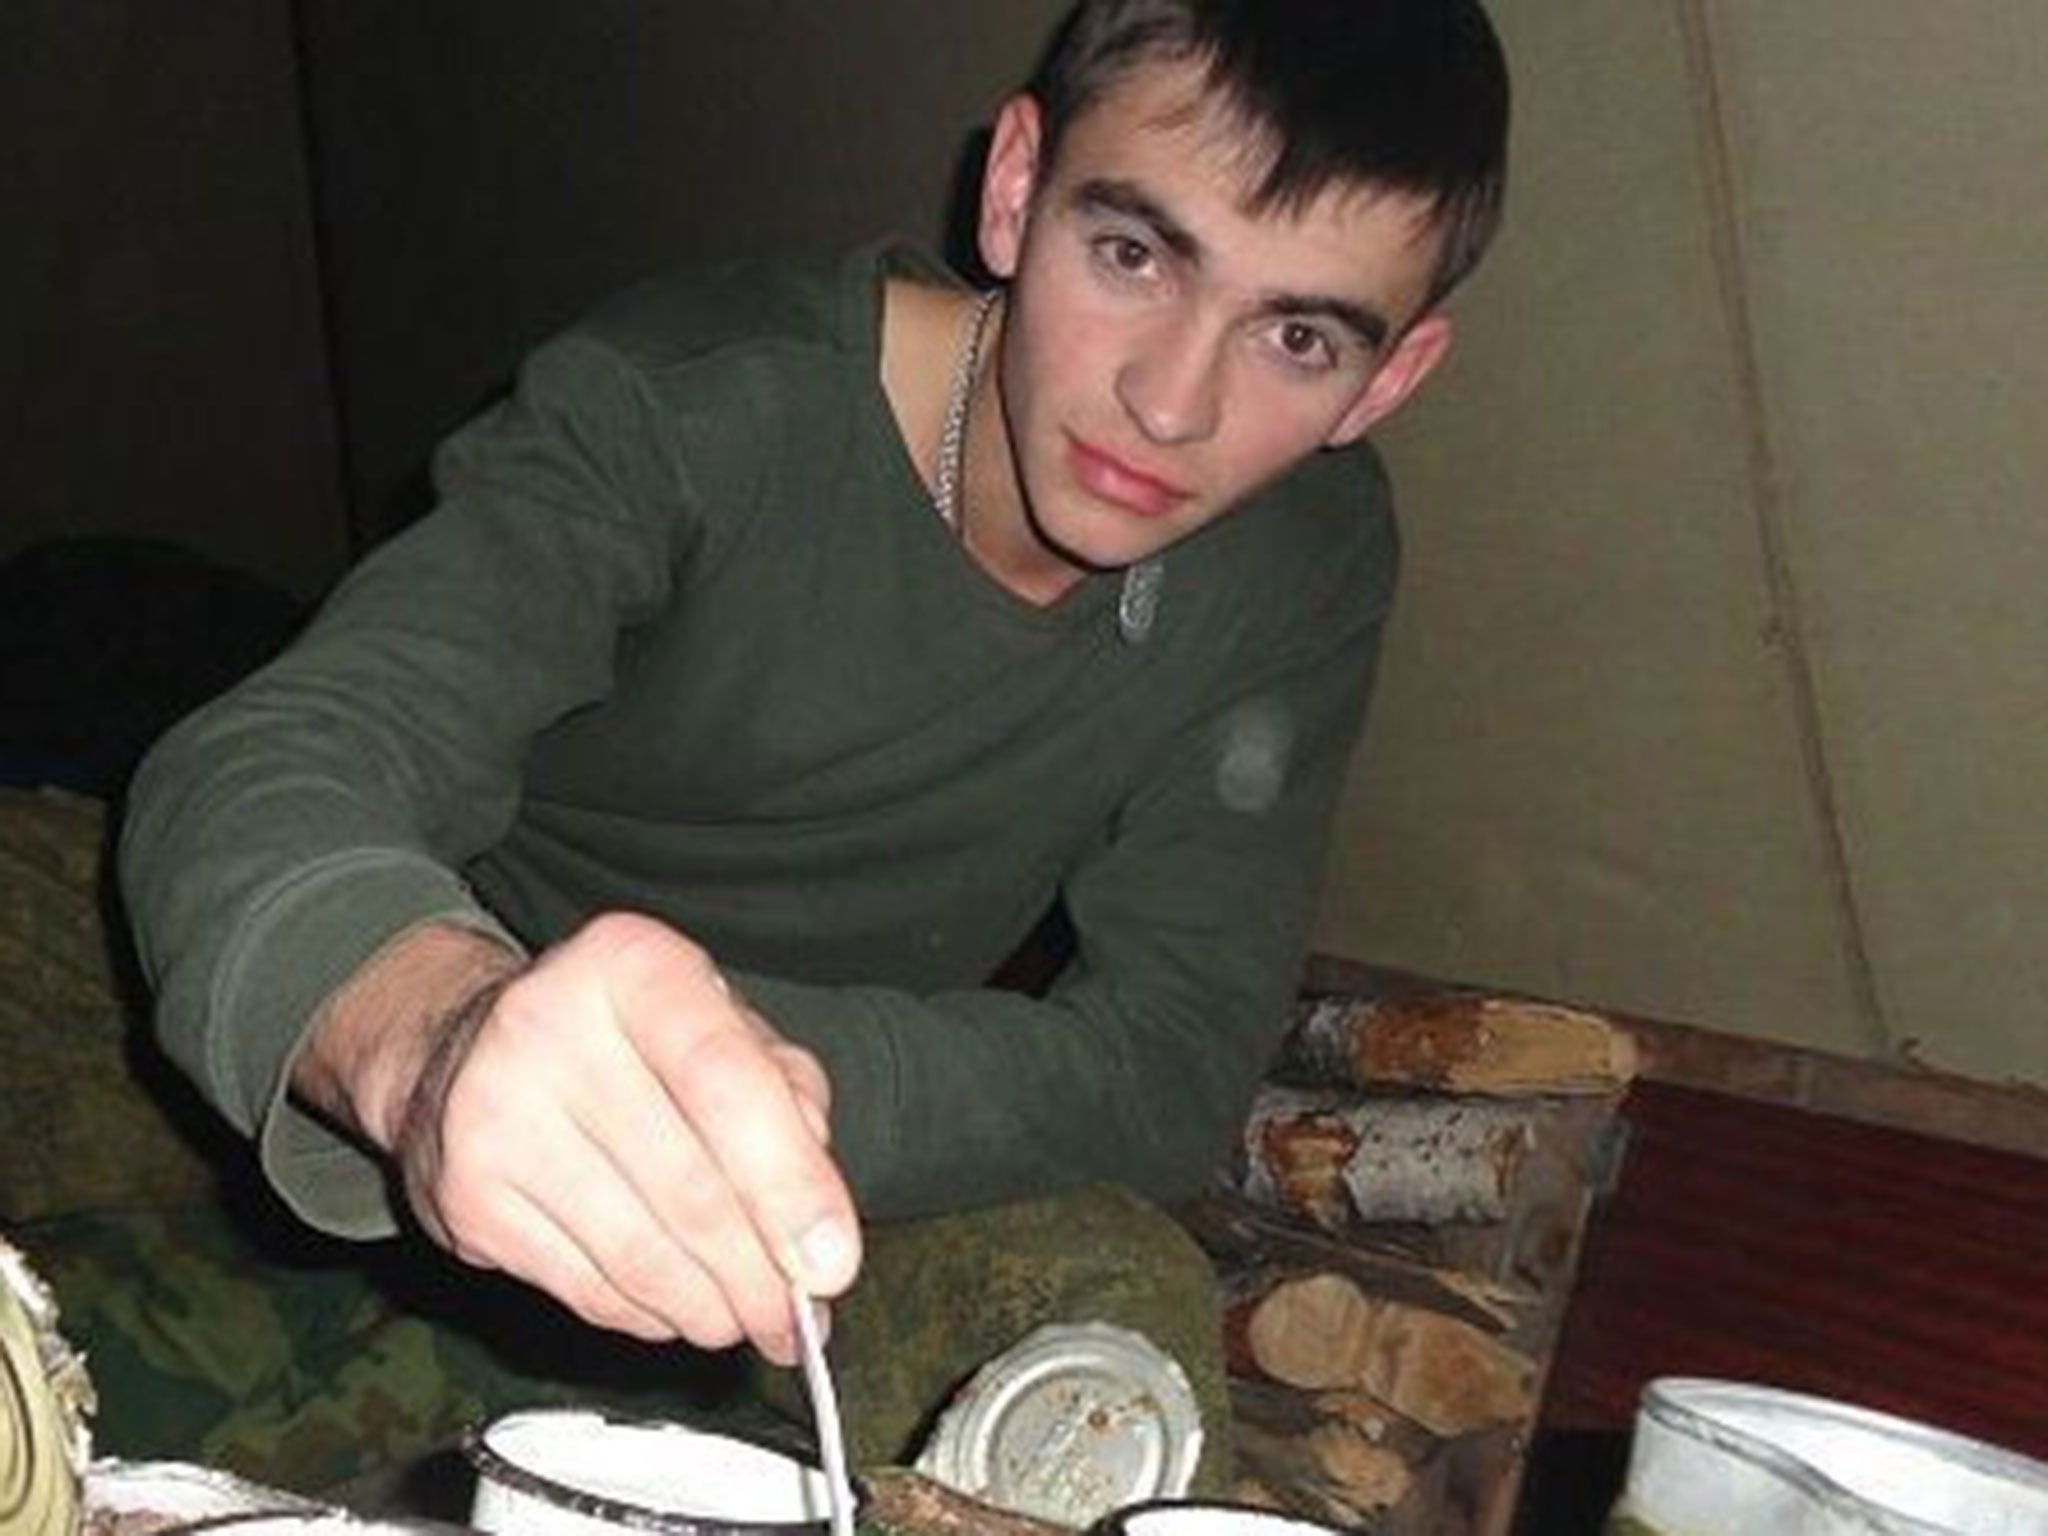 Alexander Prokhorenko died after ordering an air strike on himself in Palmyra on 17 March 2016, Russian defence officials said